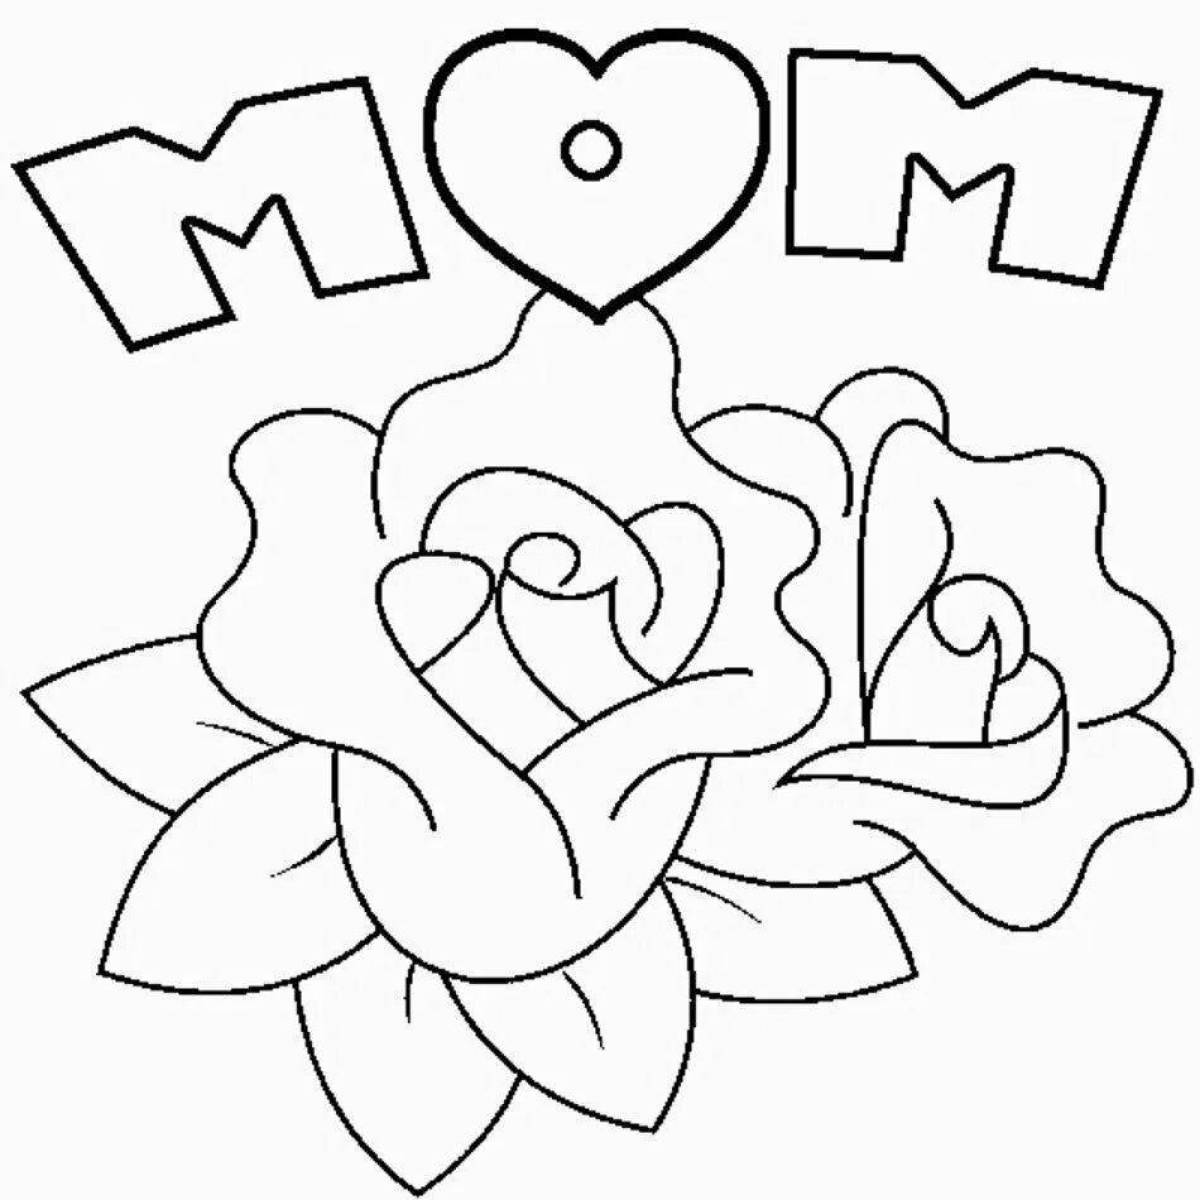 Great coloring book for mom